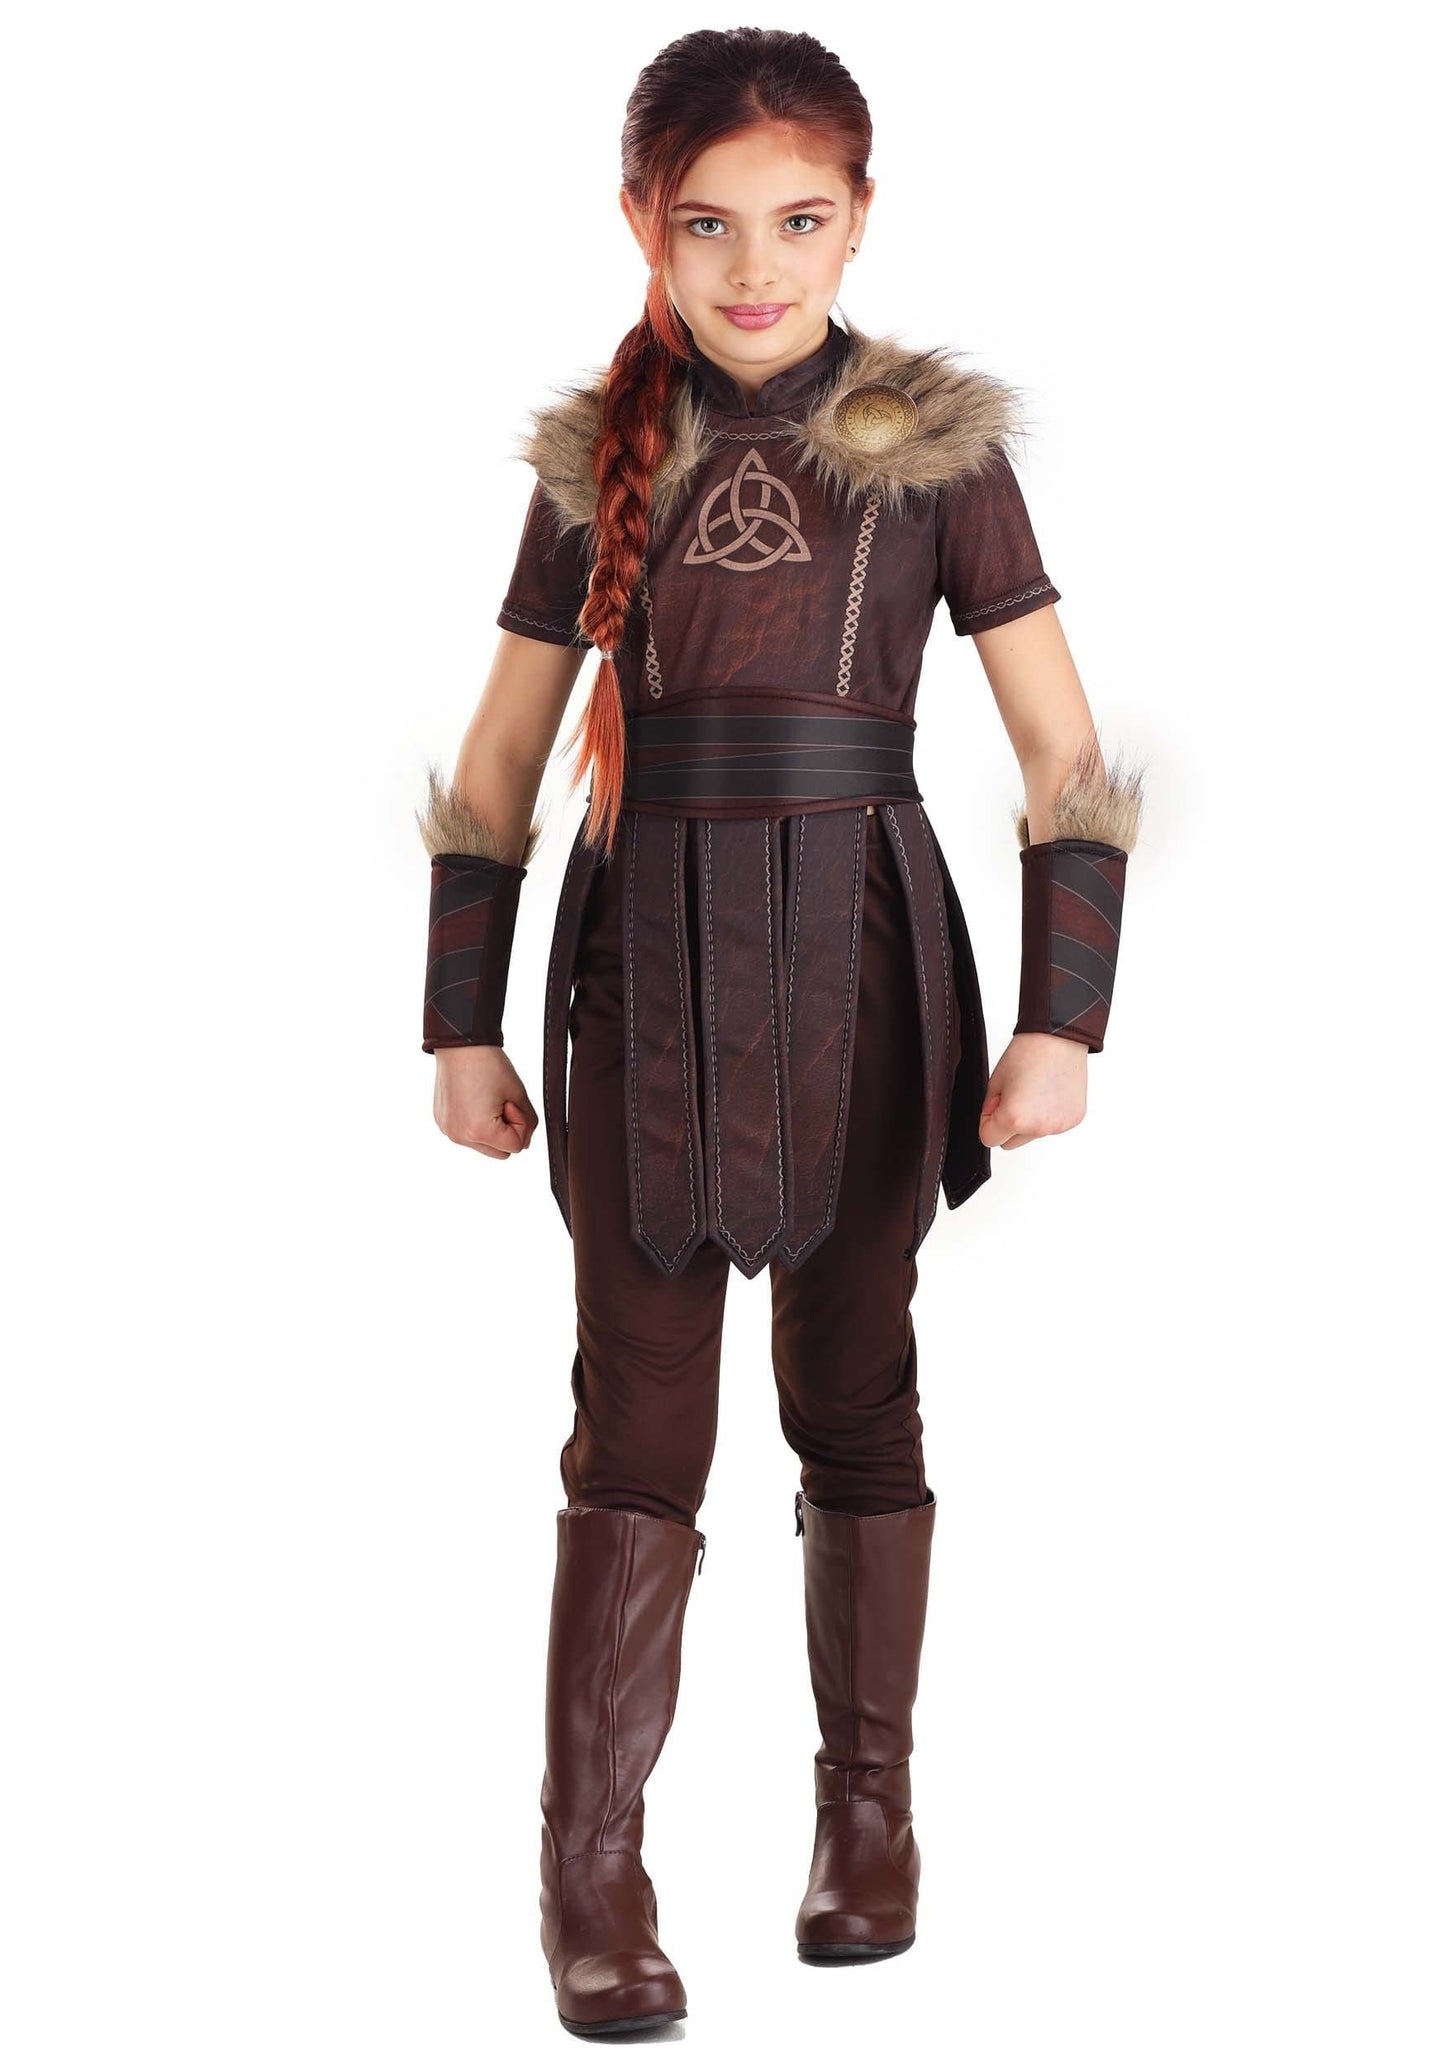 Women's Deluxe Victorious Viking Costume